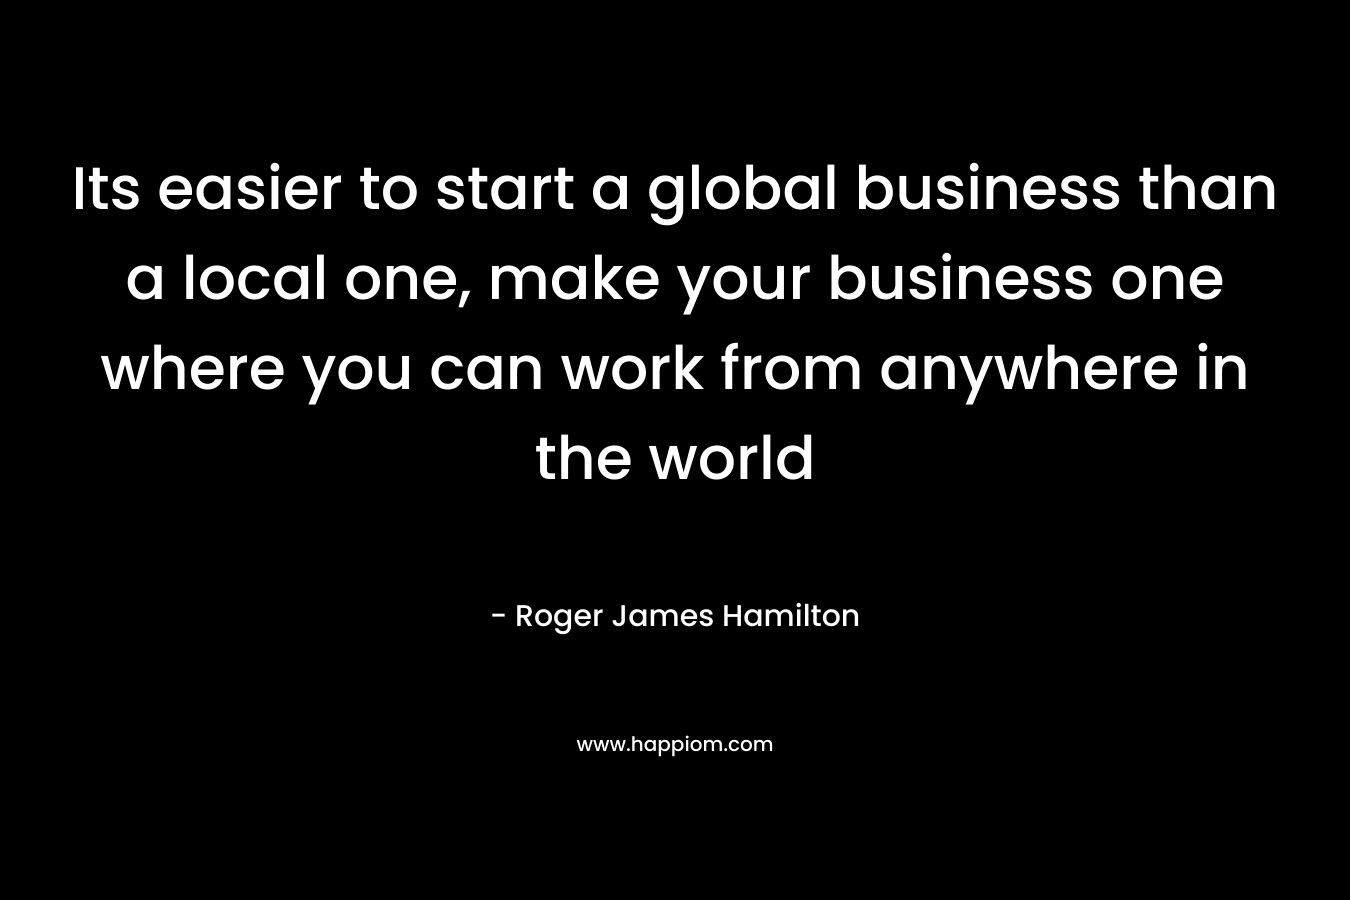 Its easier to start a global business than a local one, make your business one where you can work from anywhere in the world